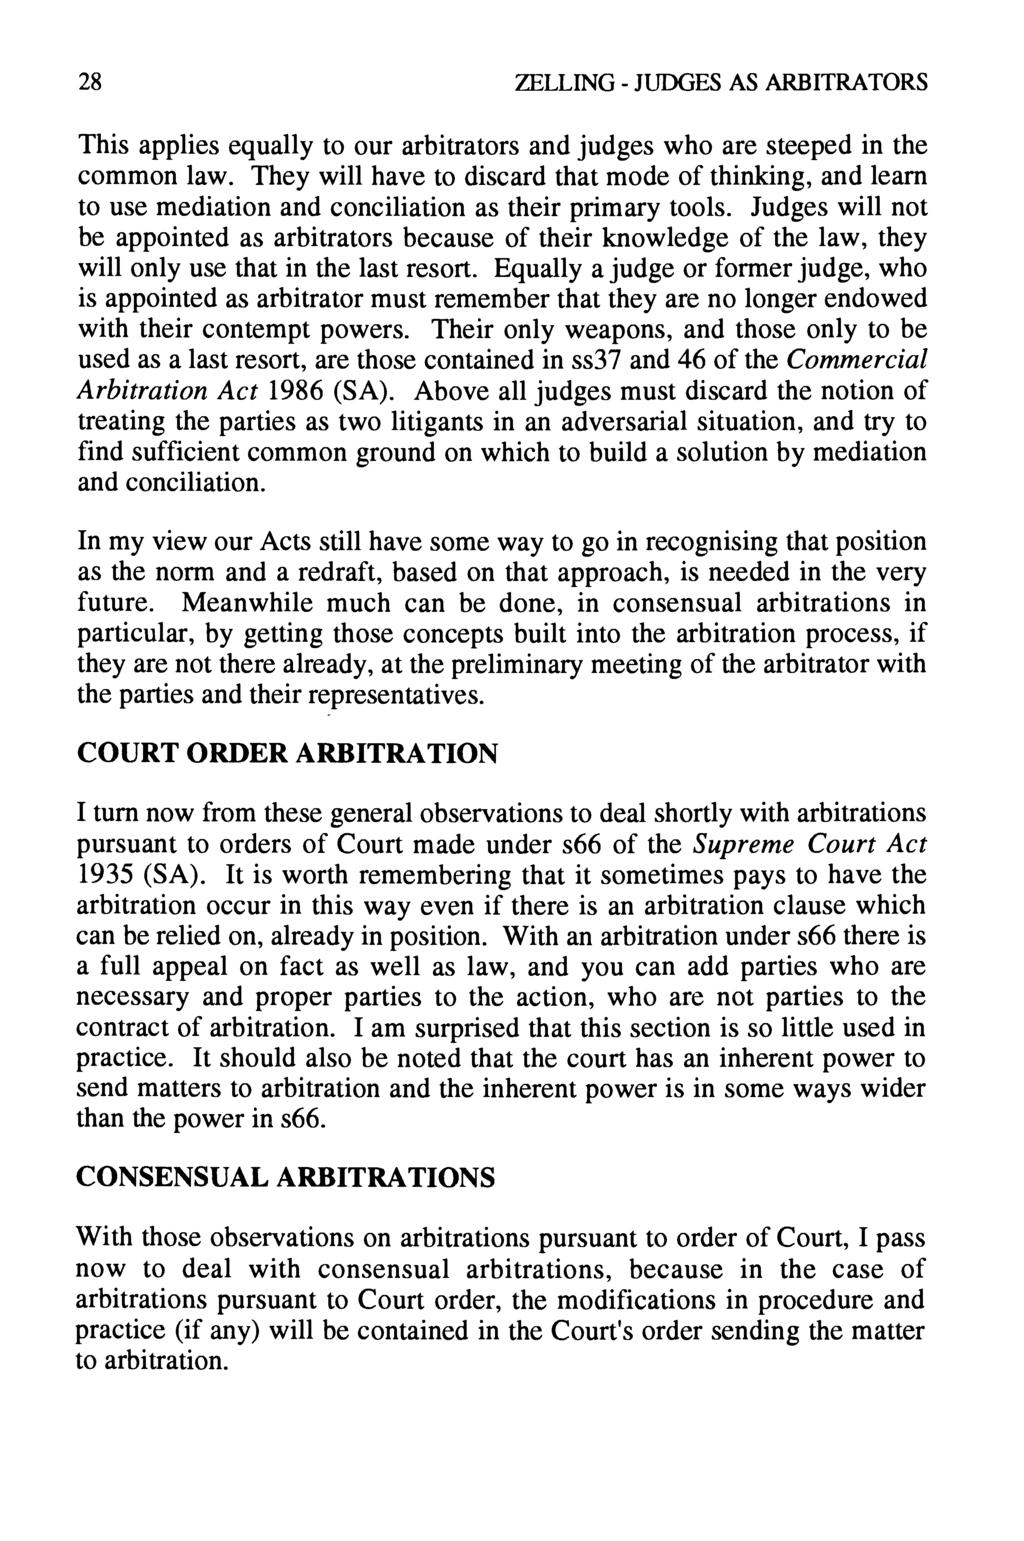 28 ZELLING - JUDGES AS ARBITRATORS This applies equally to our arbitrators and judges who are steeped in the common law.